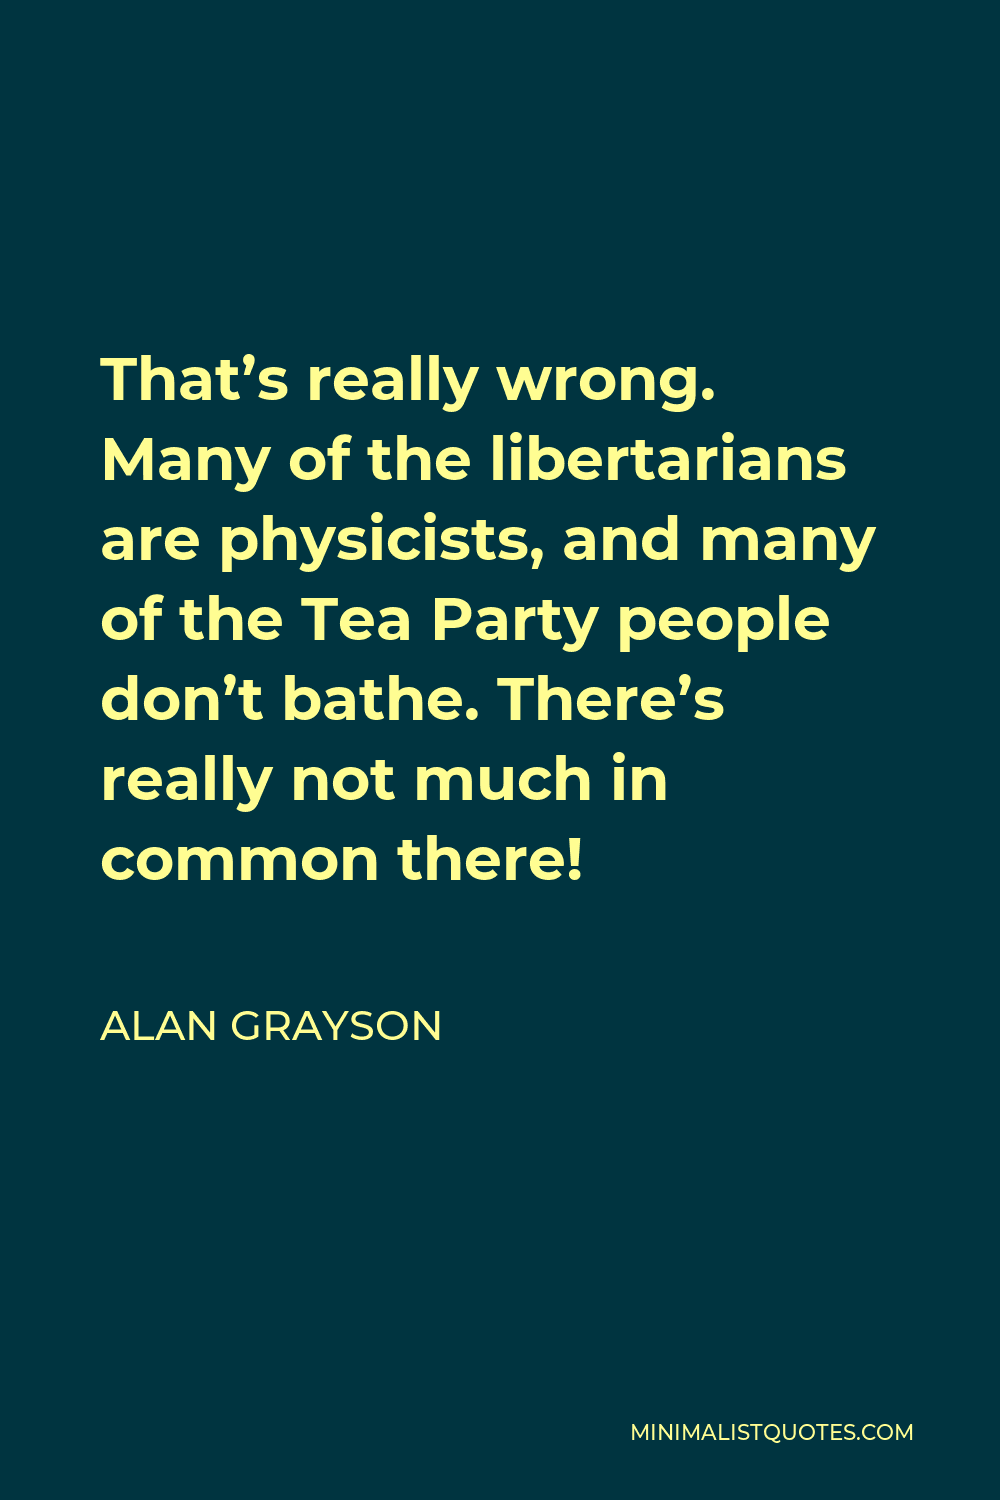 Alan Grayson Quote - That’s really wrong. Many of the libertarians are physicists, and many of the Tea Party people don’t bathe. There’s really not much in common there!